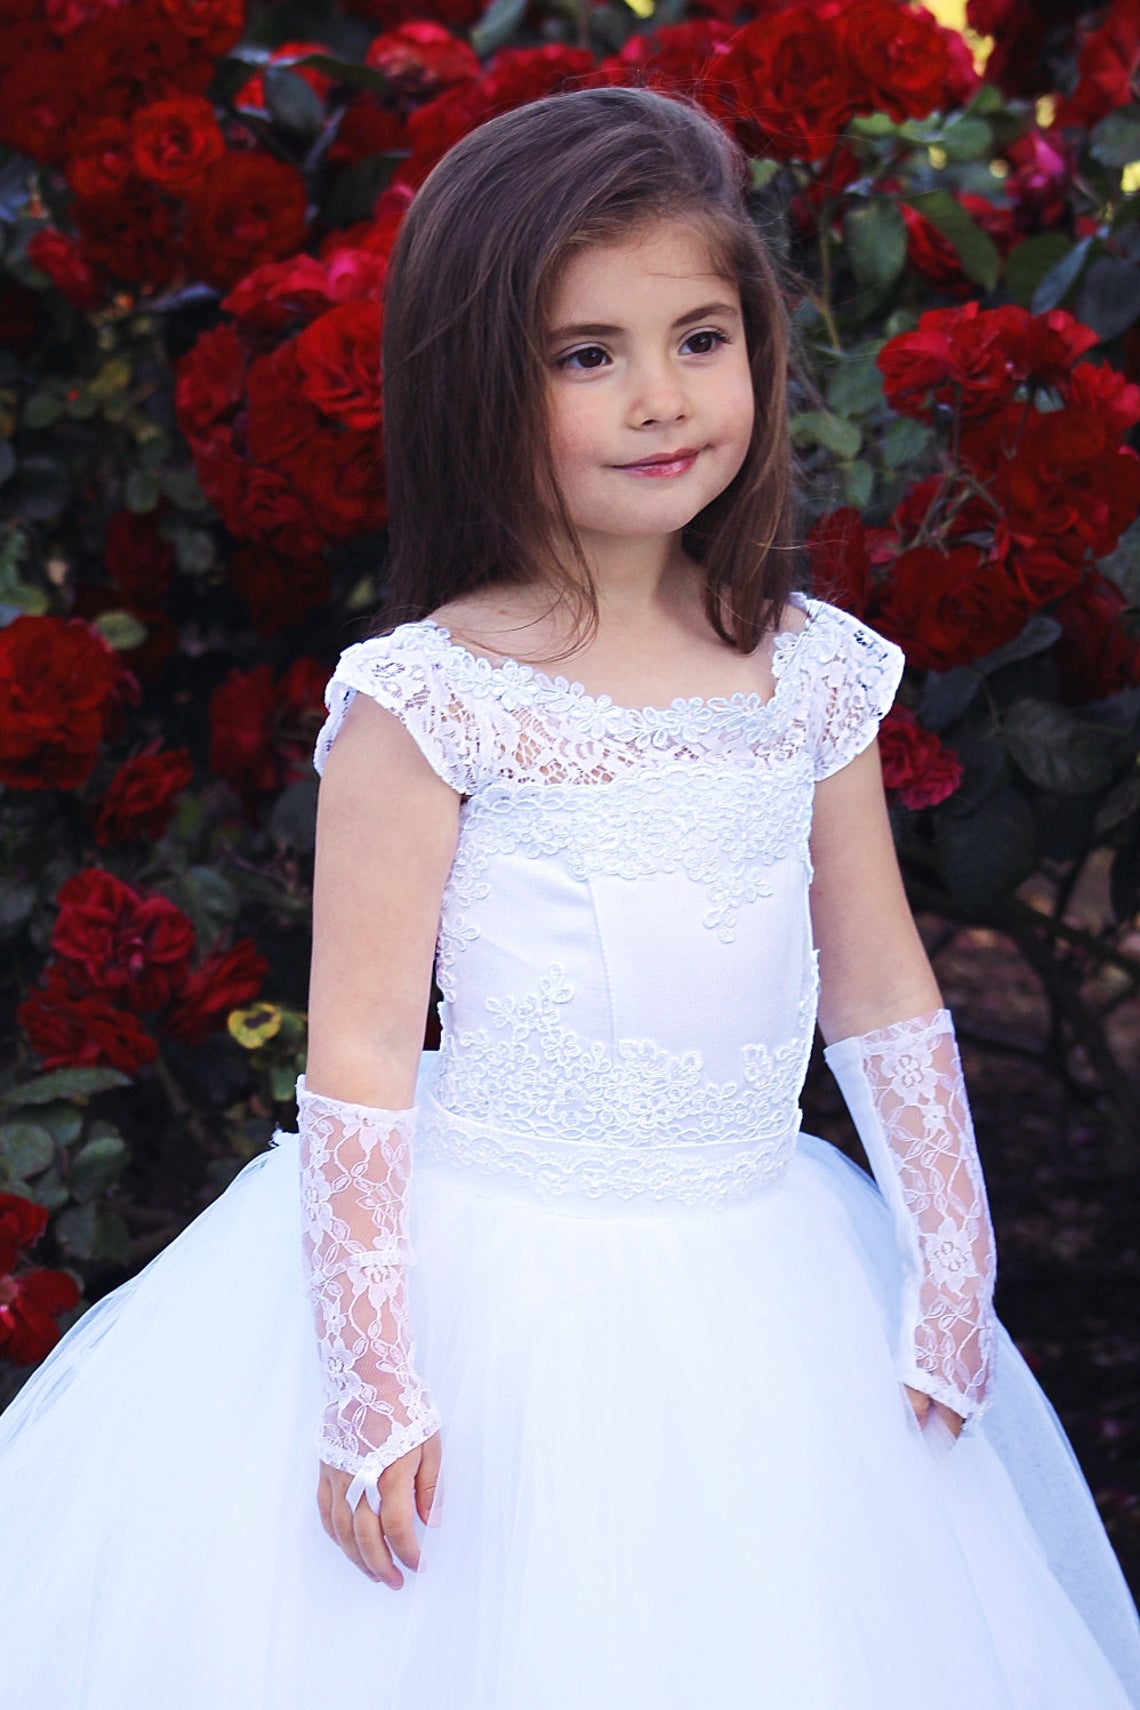 White Lace Communion Gown Flower Girl Tulle Dress Baby Baptism Gown